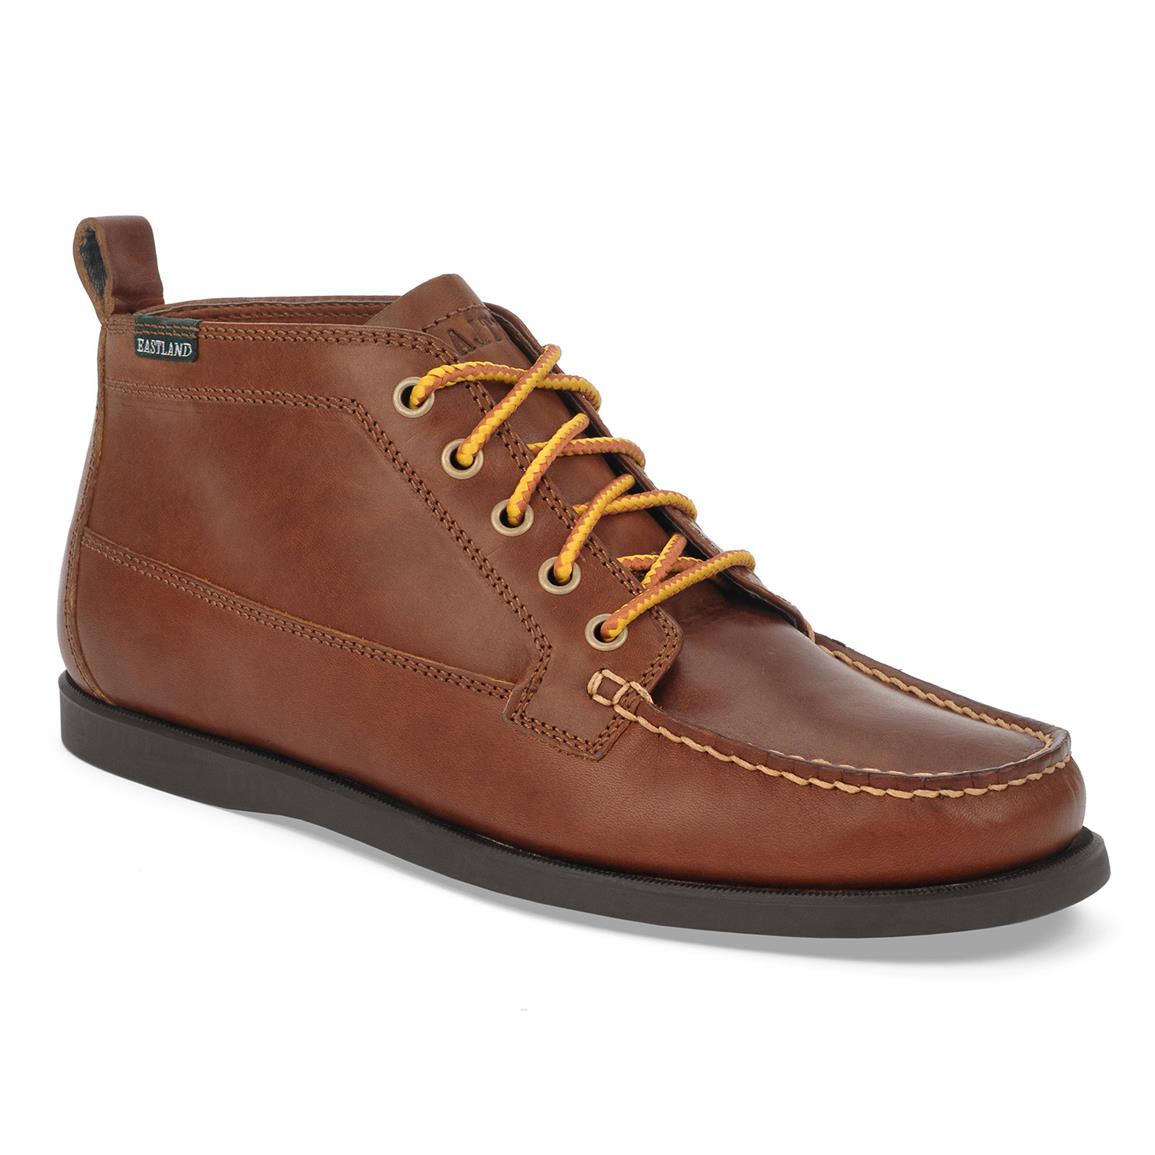 Roper Performance Gum Sole Moc-toe Chukkas - 648767, Casual Shoes at ...